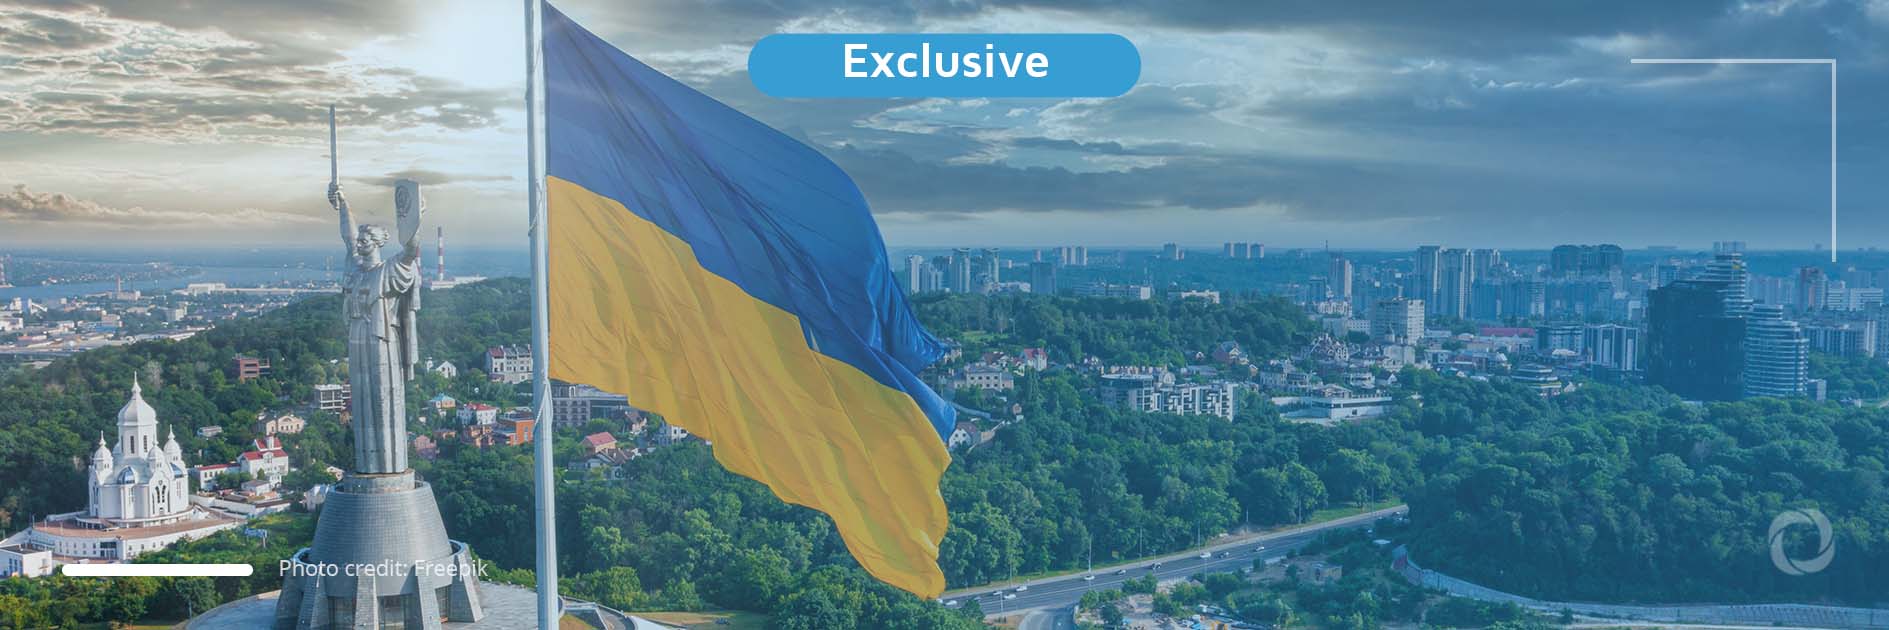 Exclusive | Susi Dennison: “One very clear political message that comes out of the European response is that the idea of Europe extends to Ukraine”